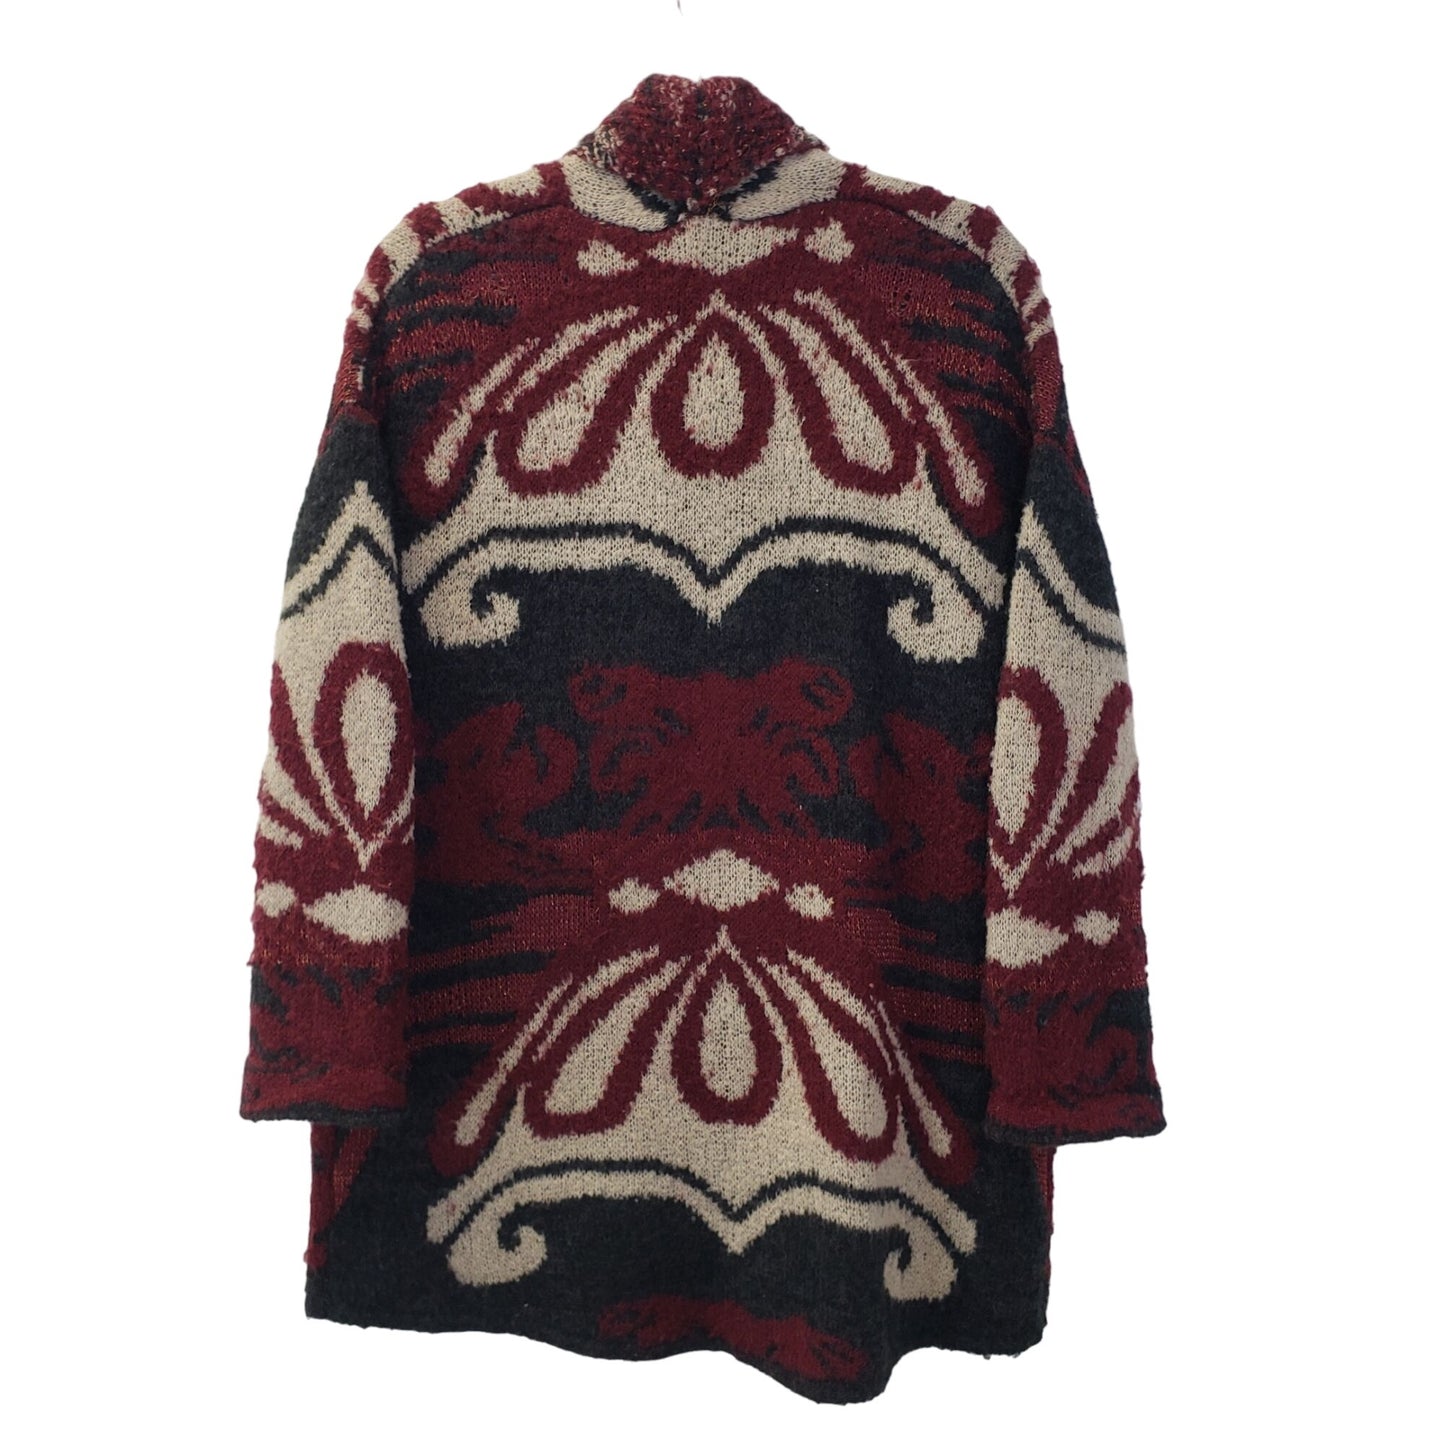 Free People Oversized Wool Blend Snap Front Cardigan Sweater Size XS/S